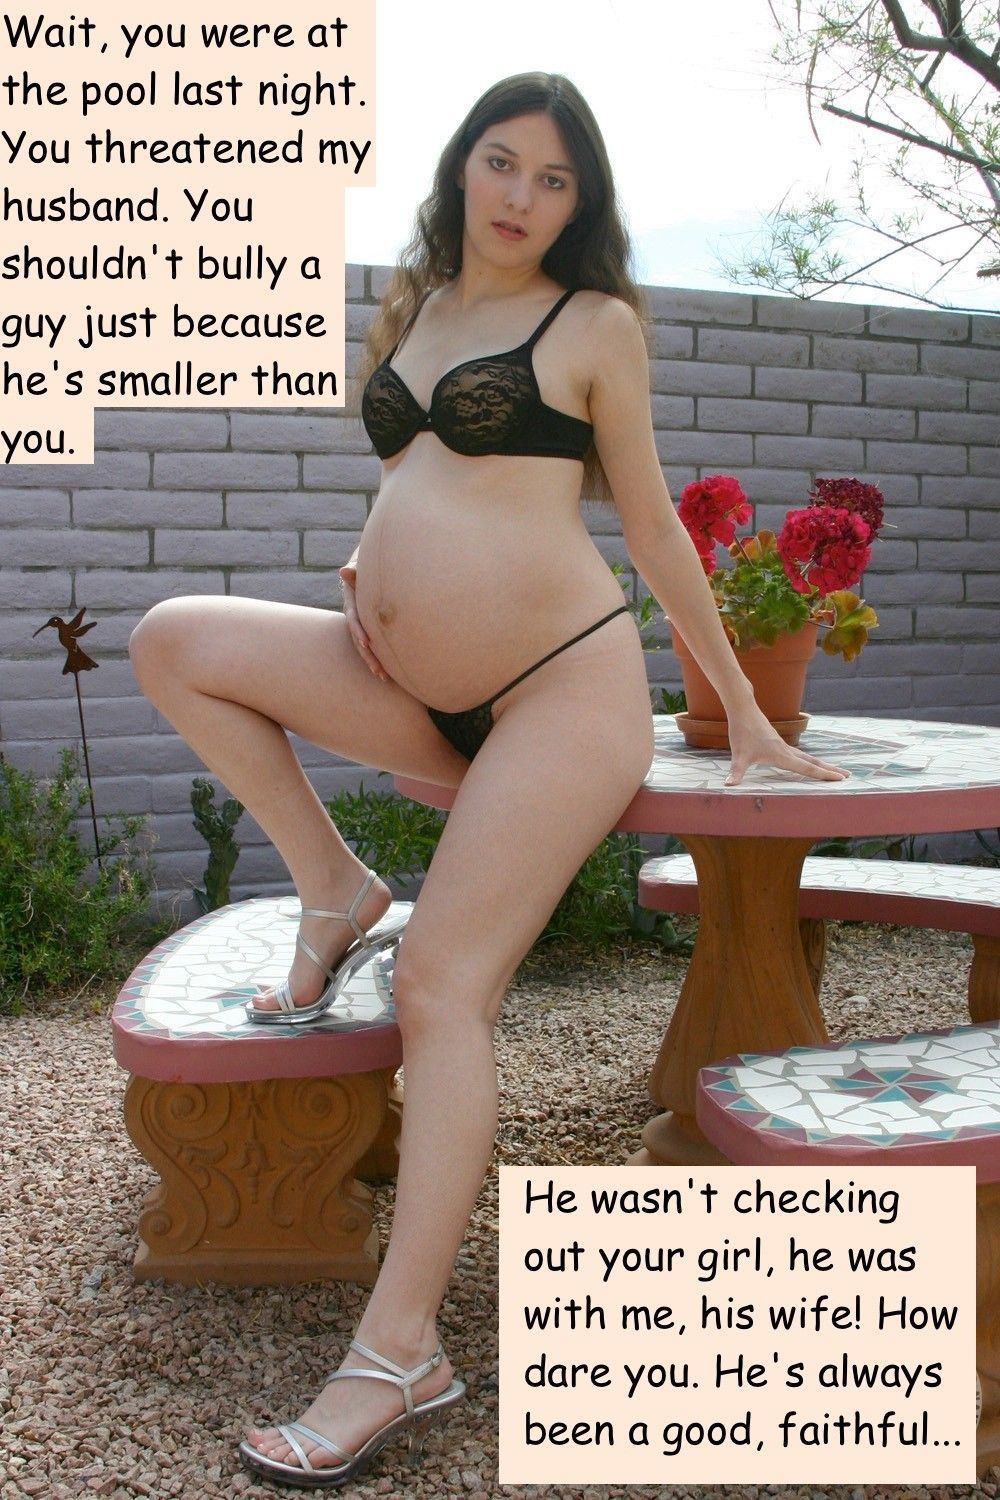 Interracial cuckold pregnant baby free stories pic